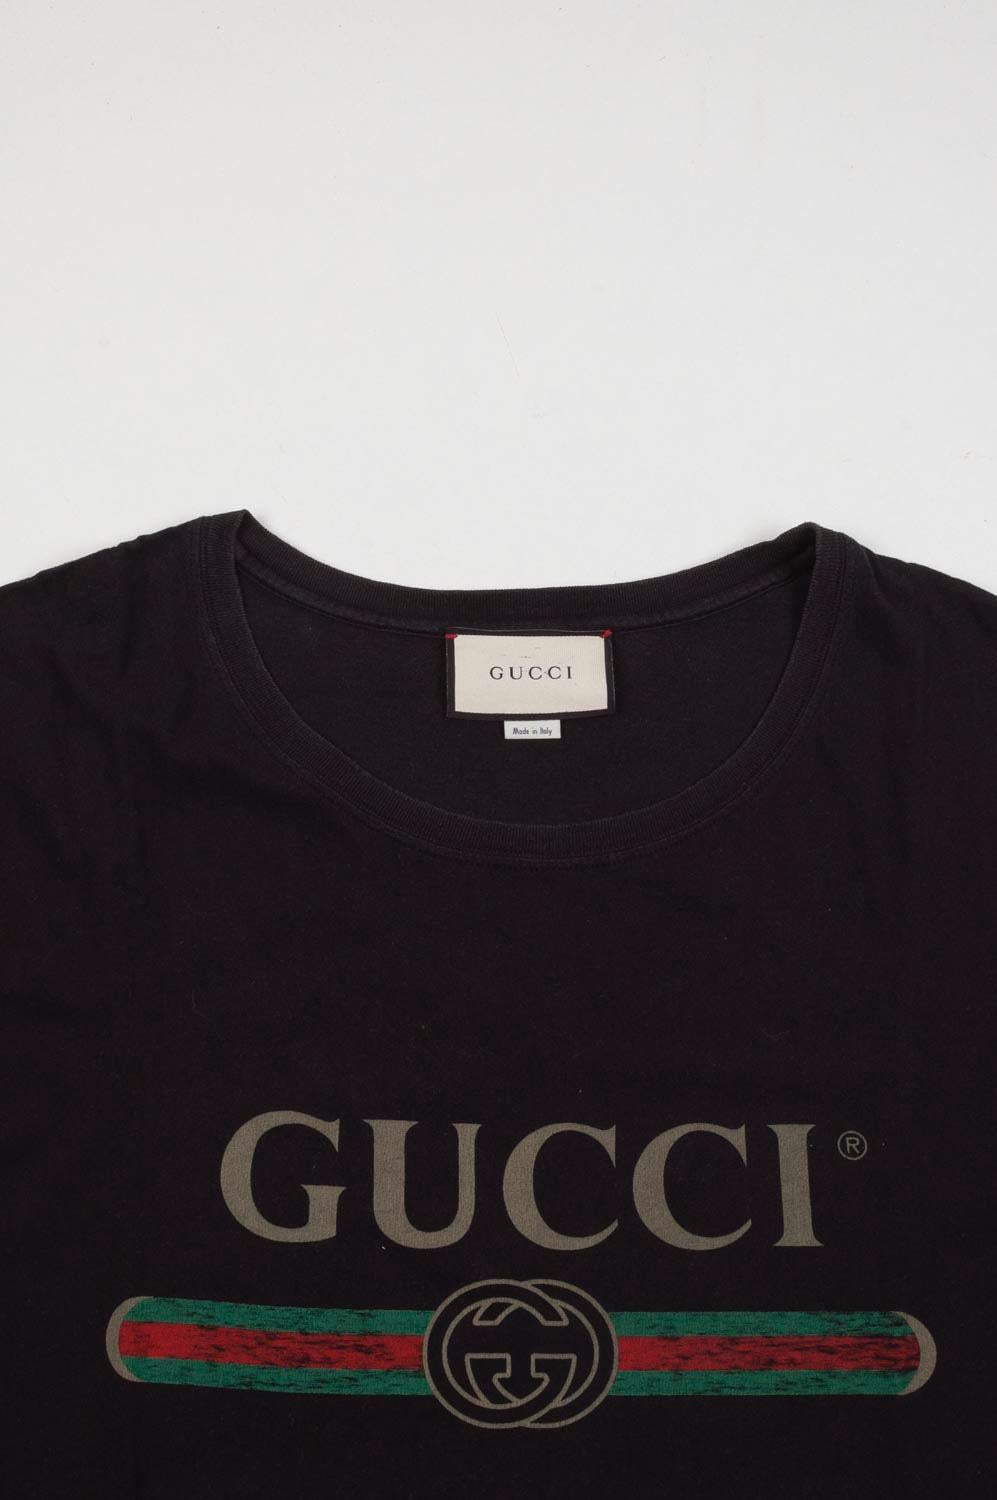 Item for sale is 100% genuine Gucci Men T-Shirt, S320
Color: Black
(An actual color may a bit vary due to individual computer screen interpretation)
Material: 100% cotton
Tag size: M
This t shirt is great quality item. Rate 9 of 10, excellent used